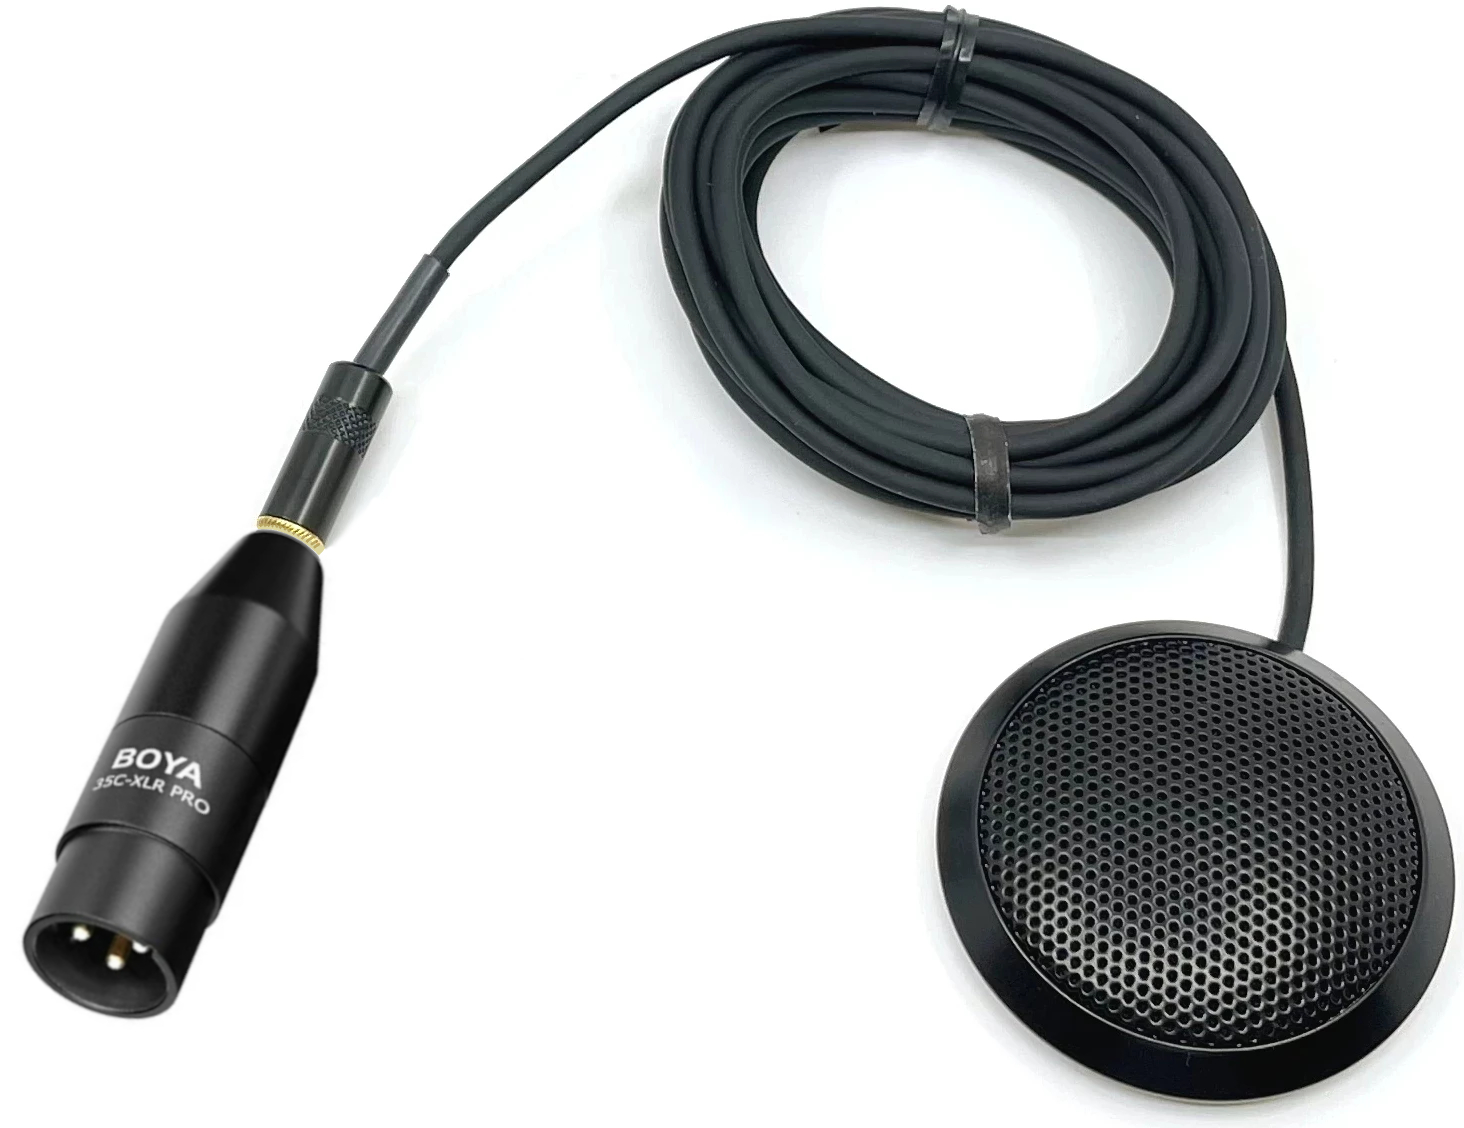 what is the xlr for?  I have the flat omnidirectional mic but it doesn't have that connector on it.